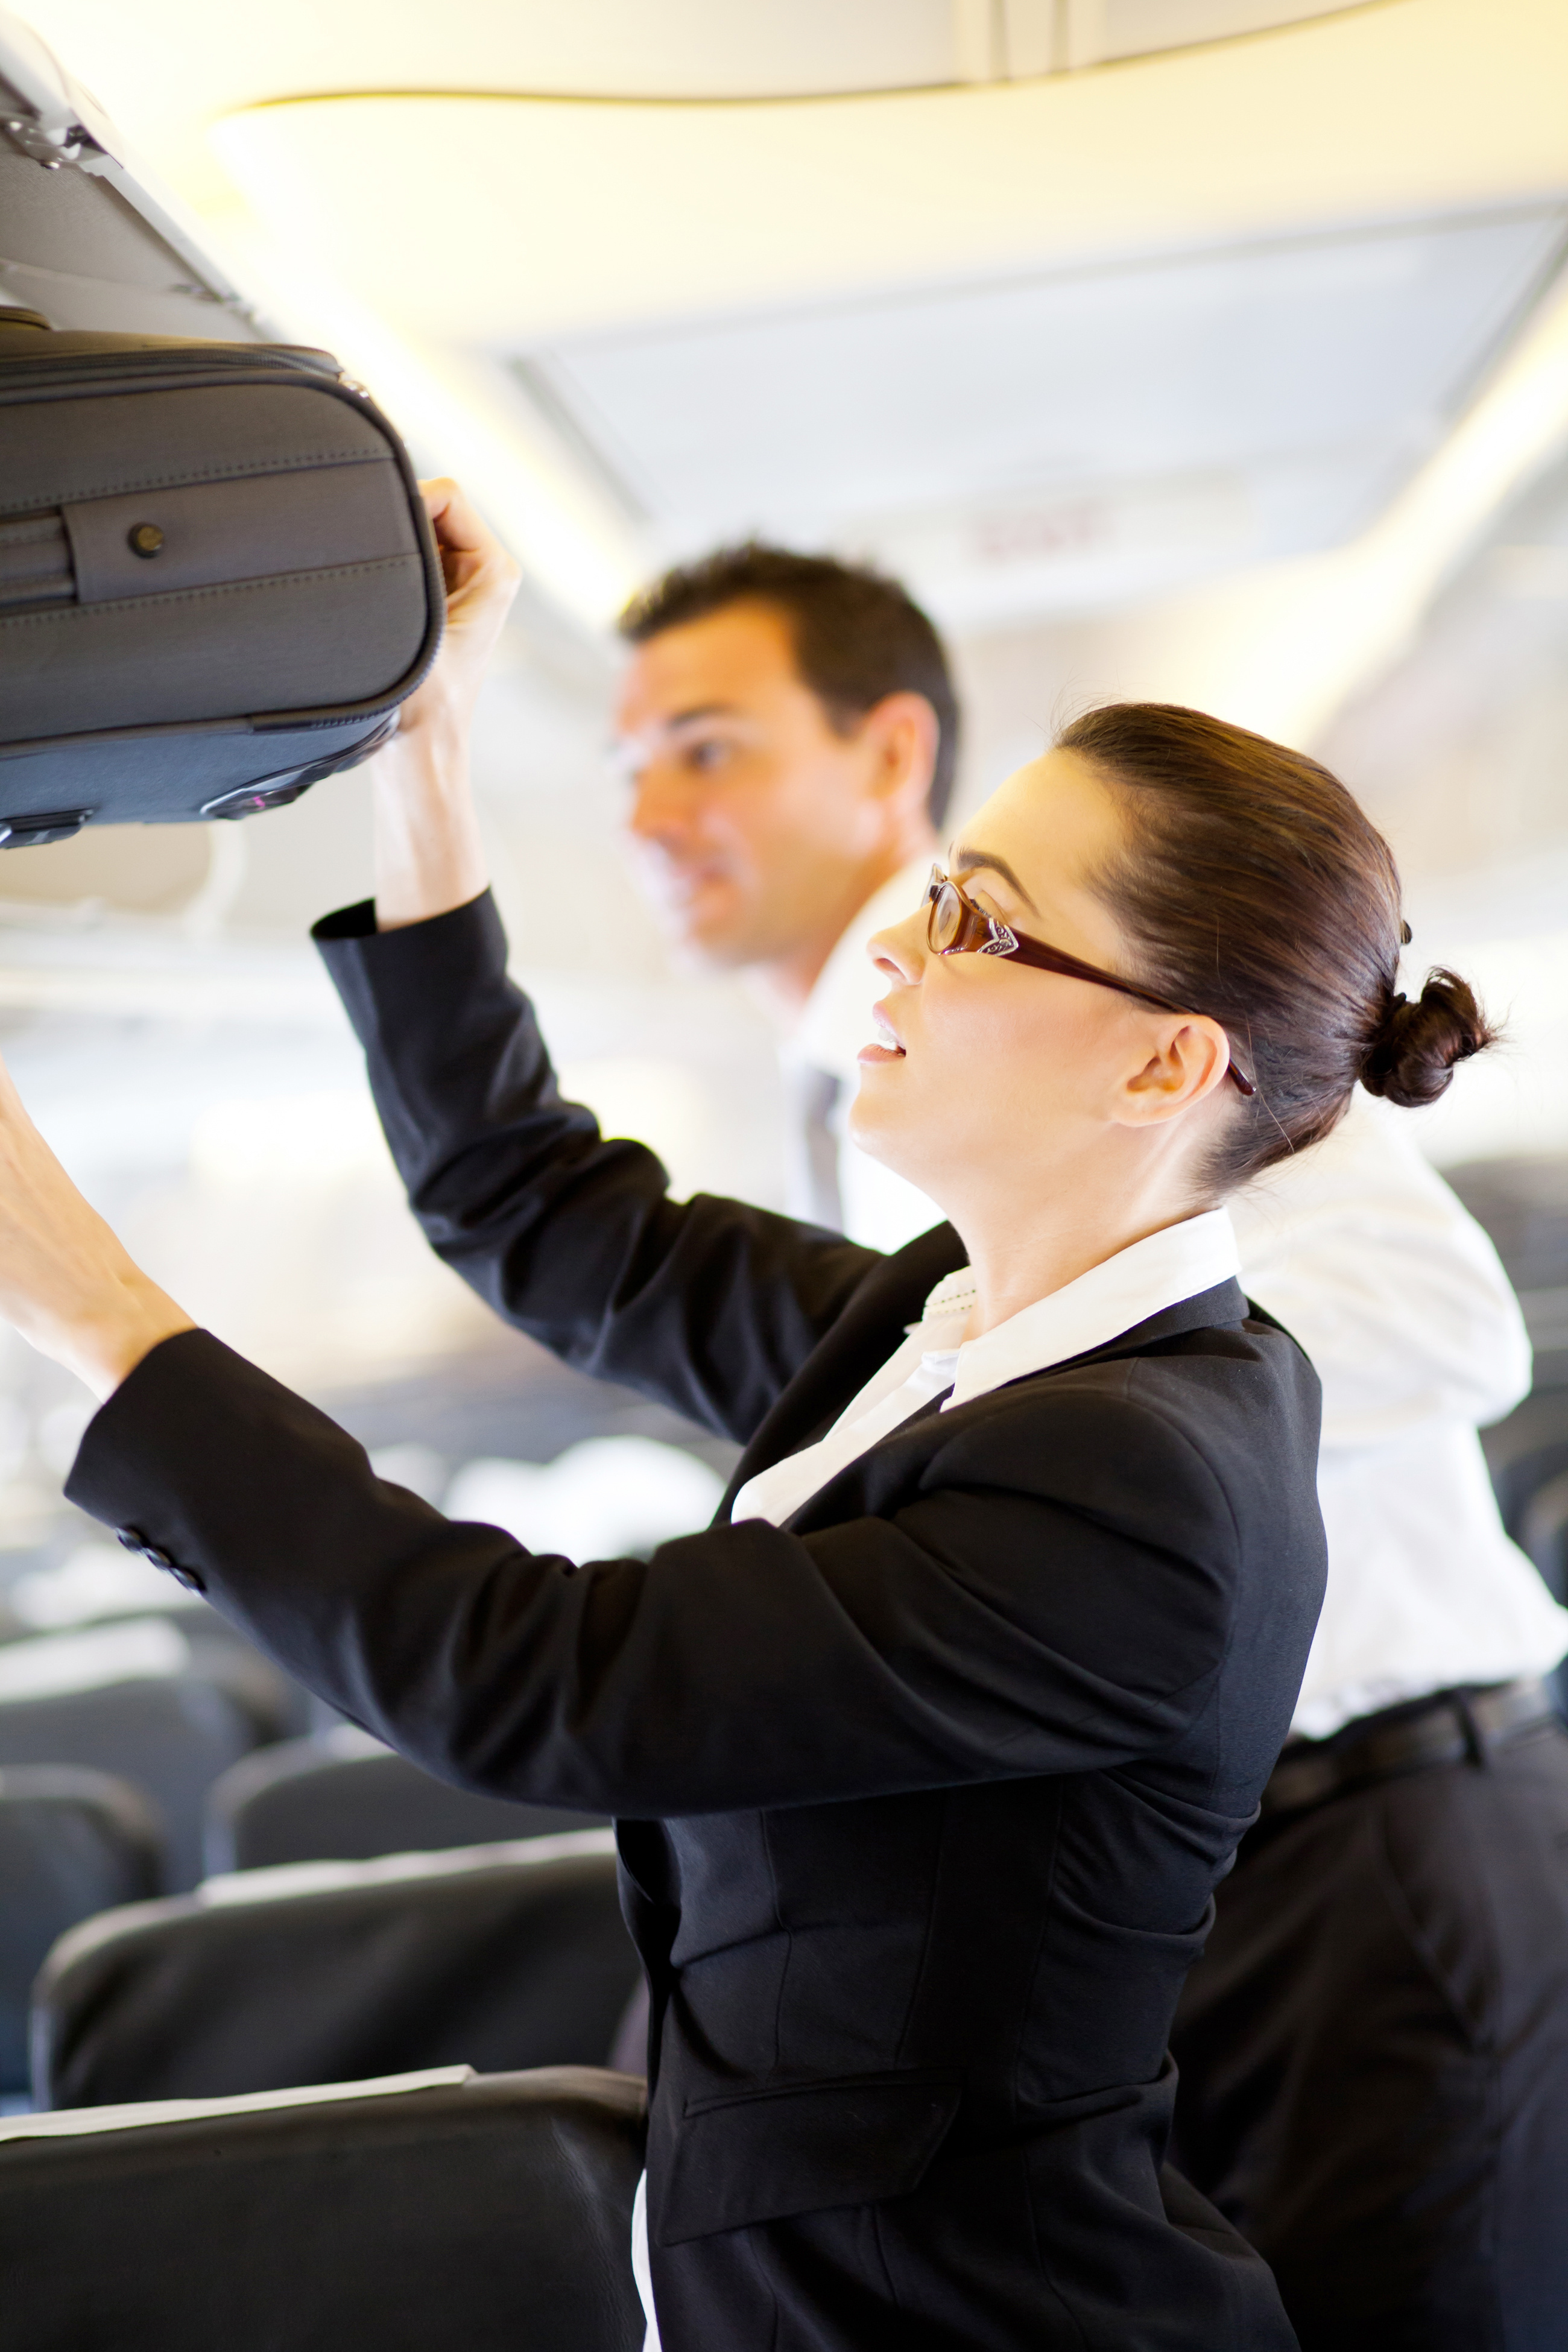 Tips for a Hassle-Free Airport Experience